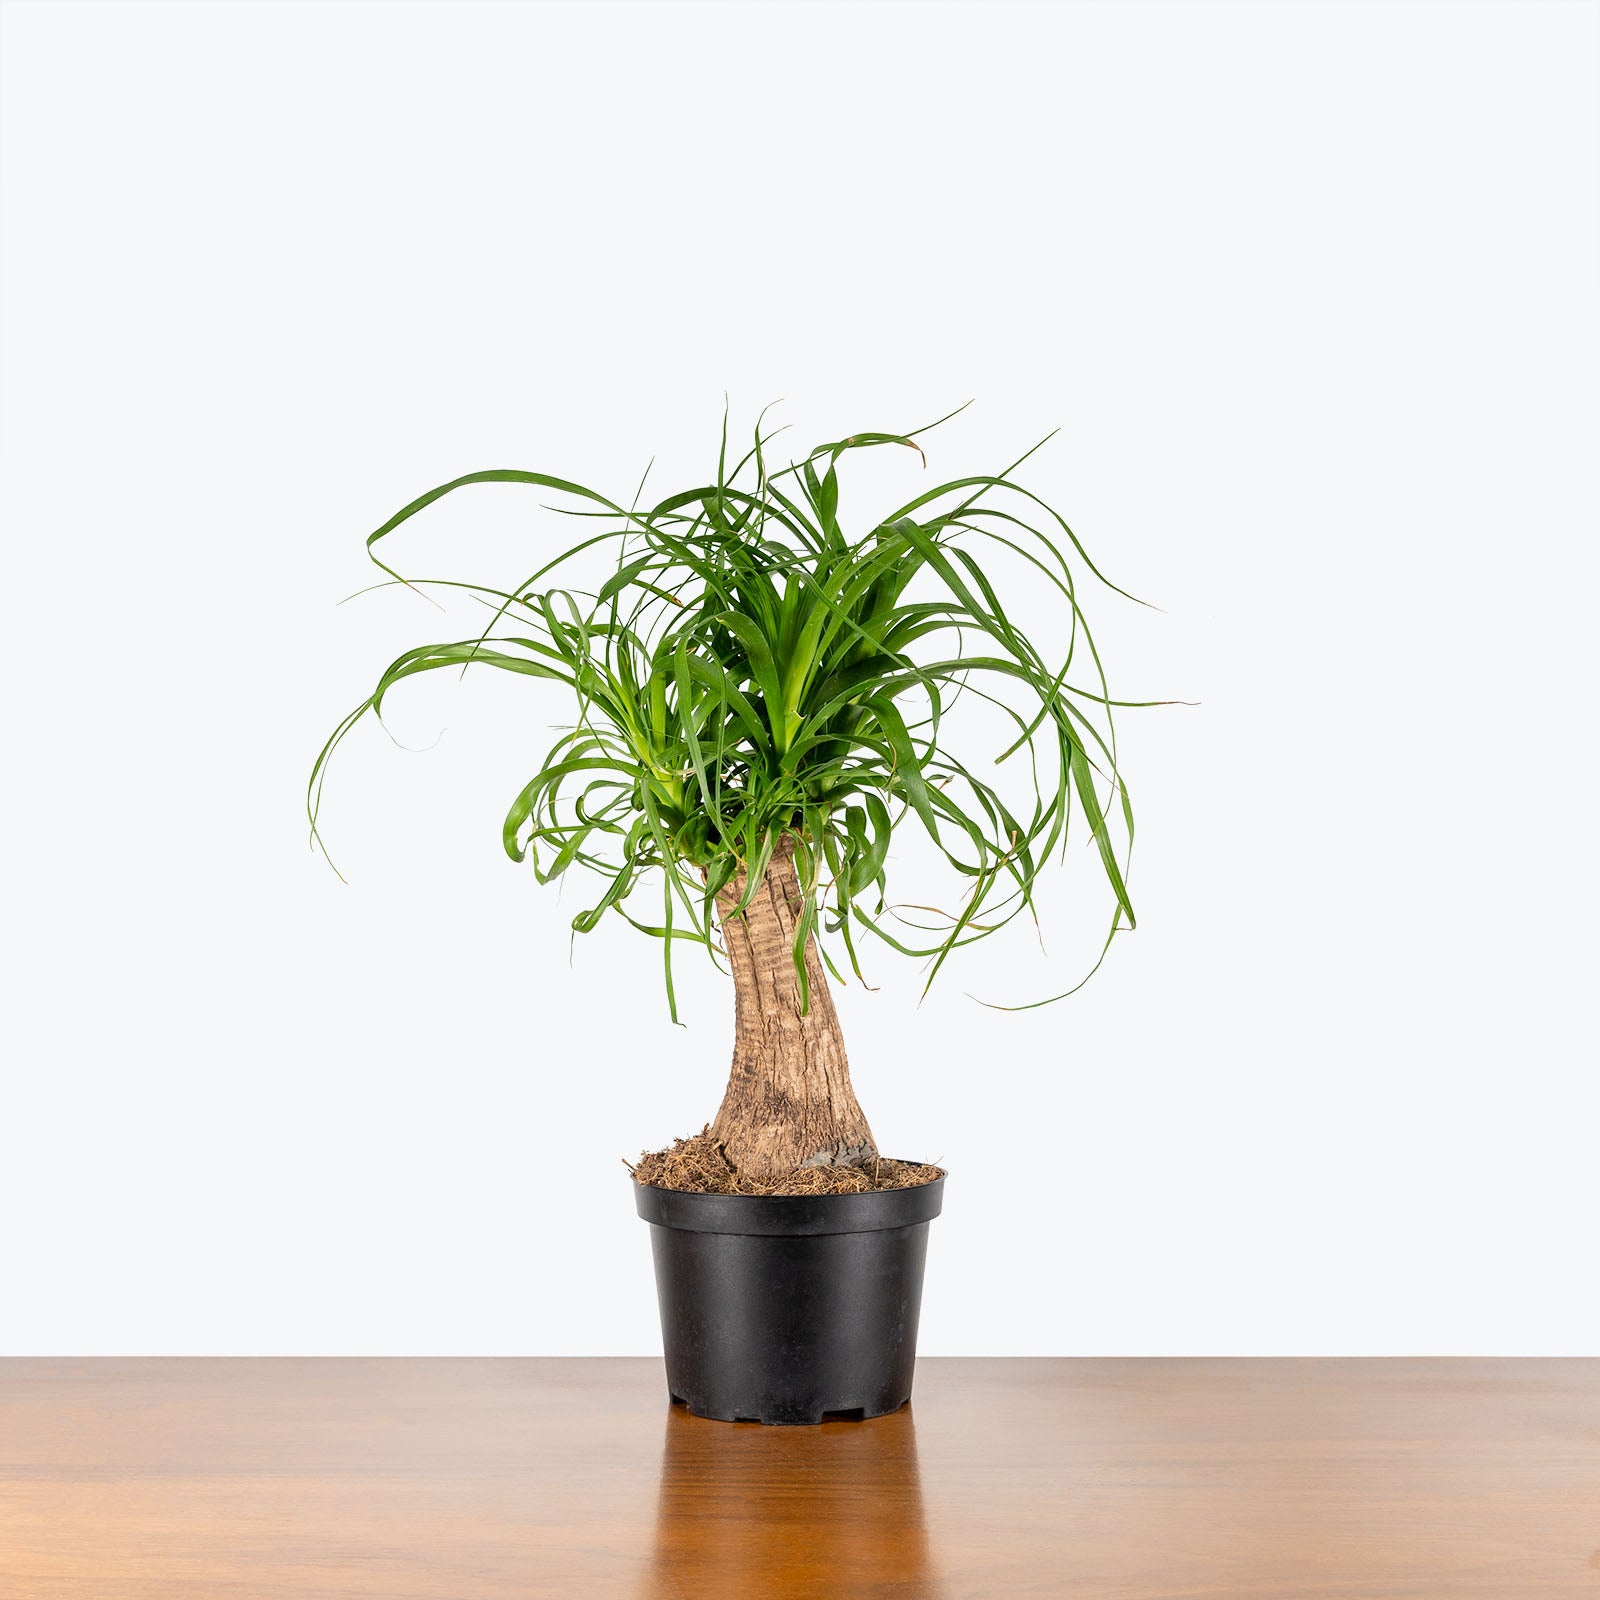 Ponytail Palm | Care Guide and Pro Tips - Delivery from Toronto across Canada - JOMO Studio